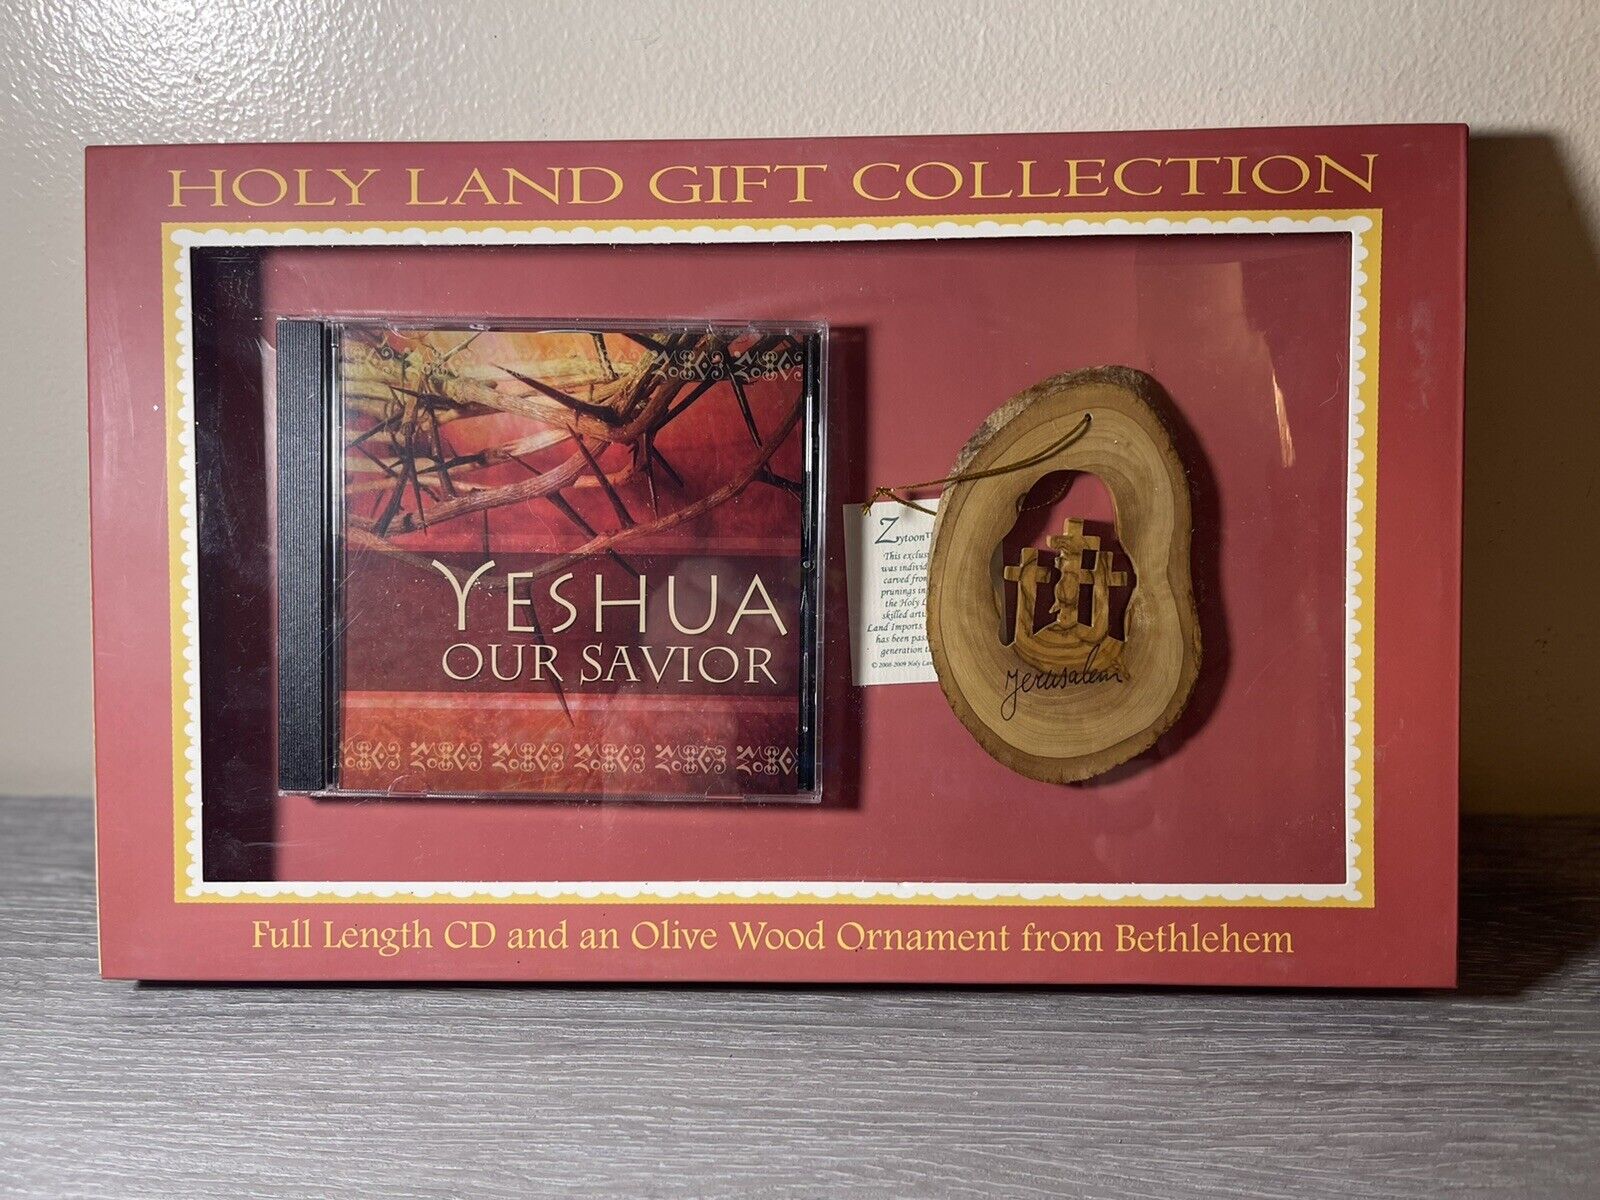 Holy Land Gift Collection - CD & Hand-Carved Ornament Yeshua Our Savior New